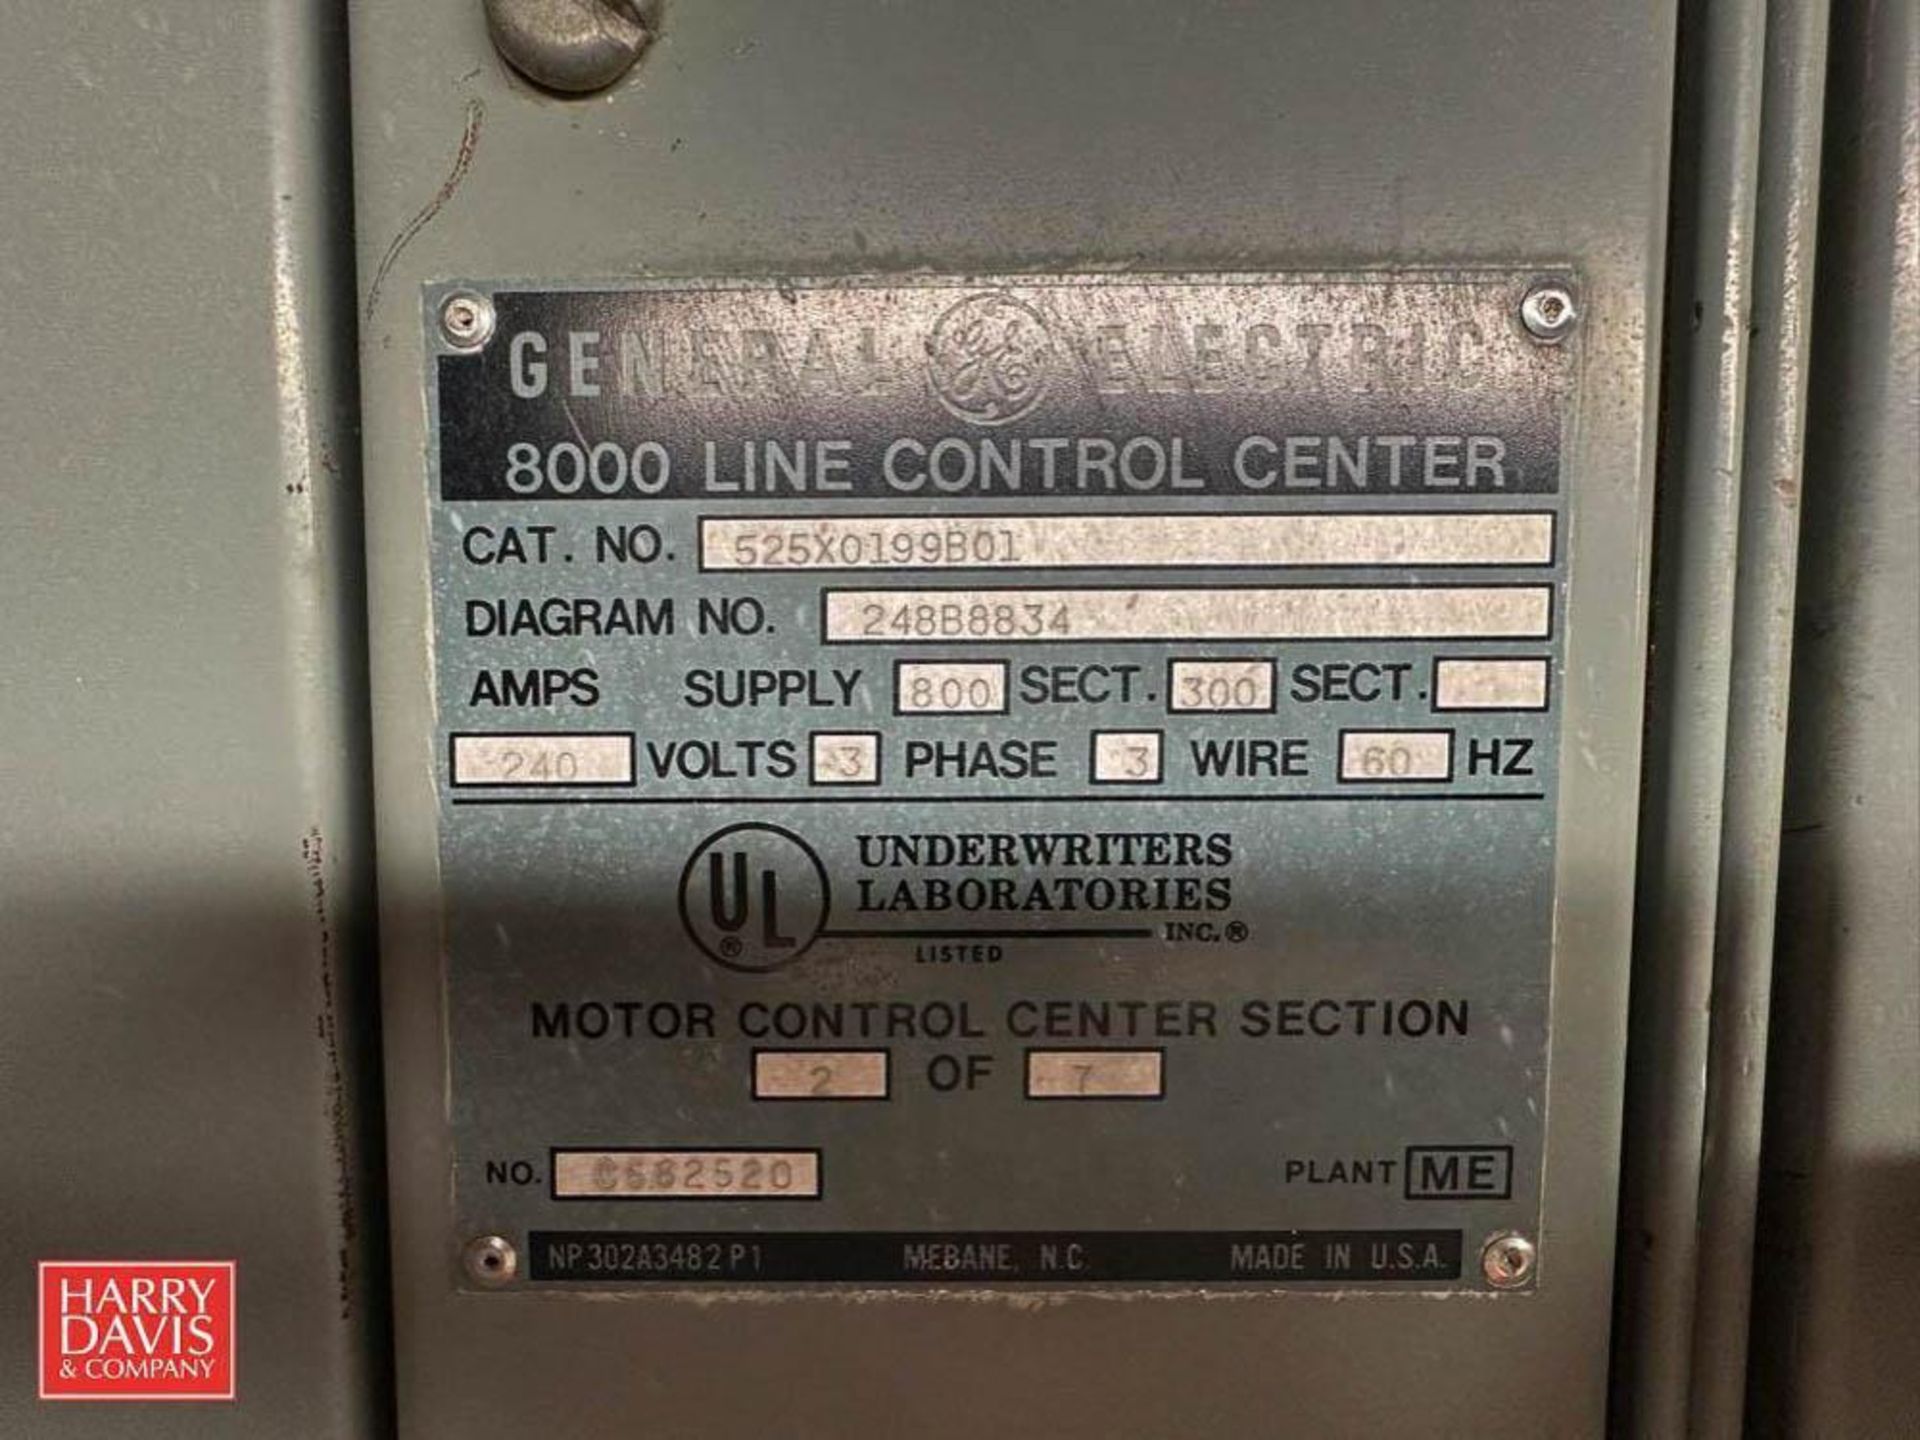 GE 8000 600/300 Amp Motor Control Center, S/N: 525X0199B01 with (35) Disconnects - Image 2 of 2